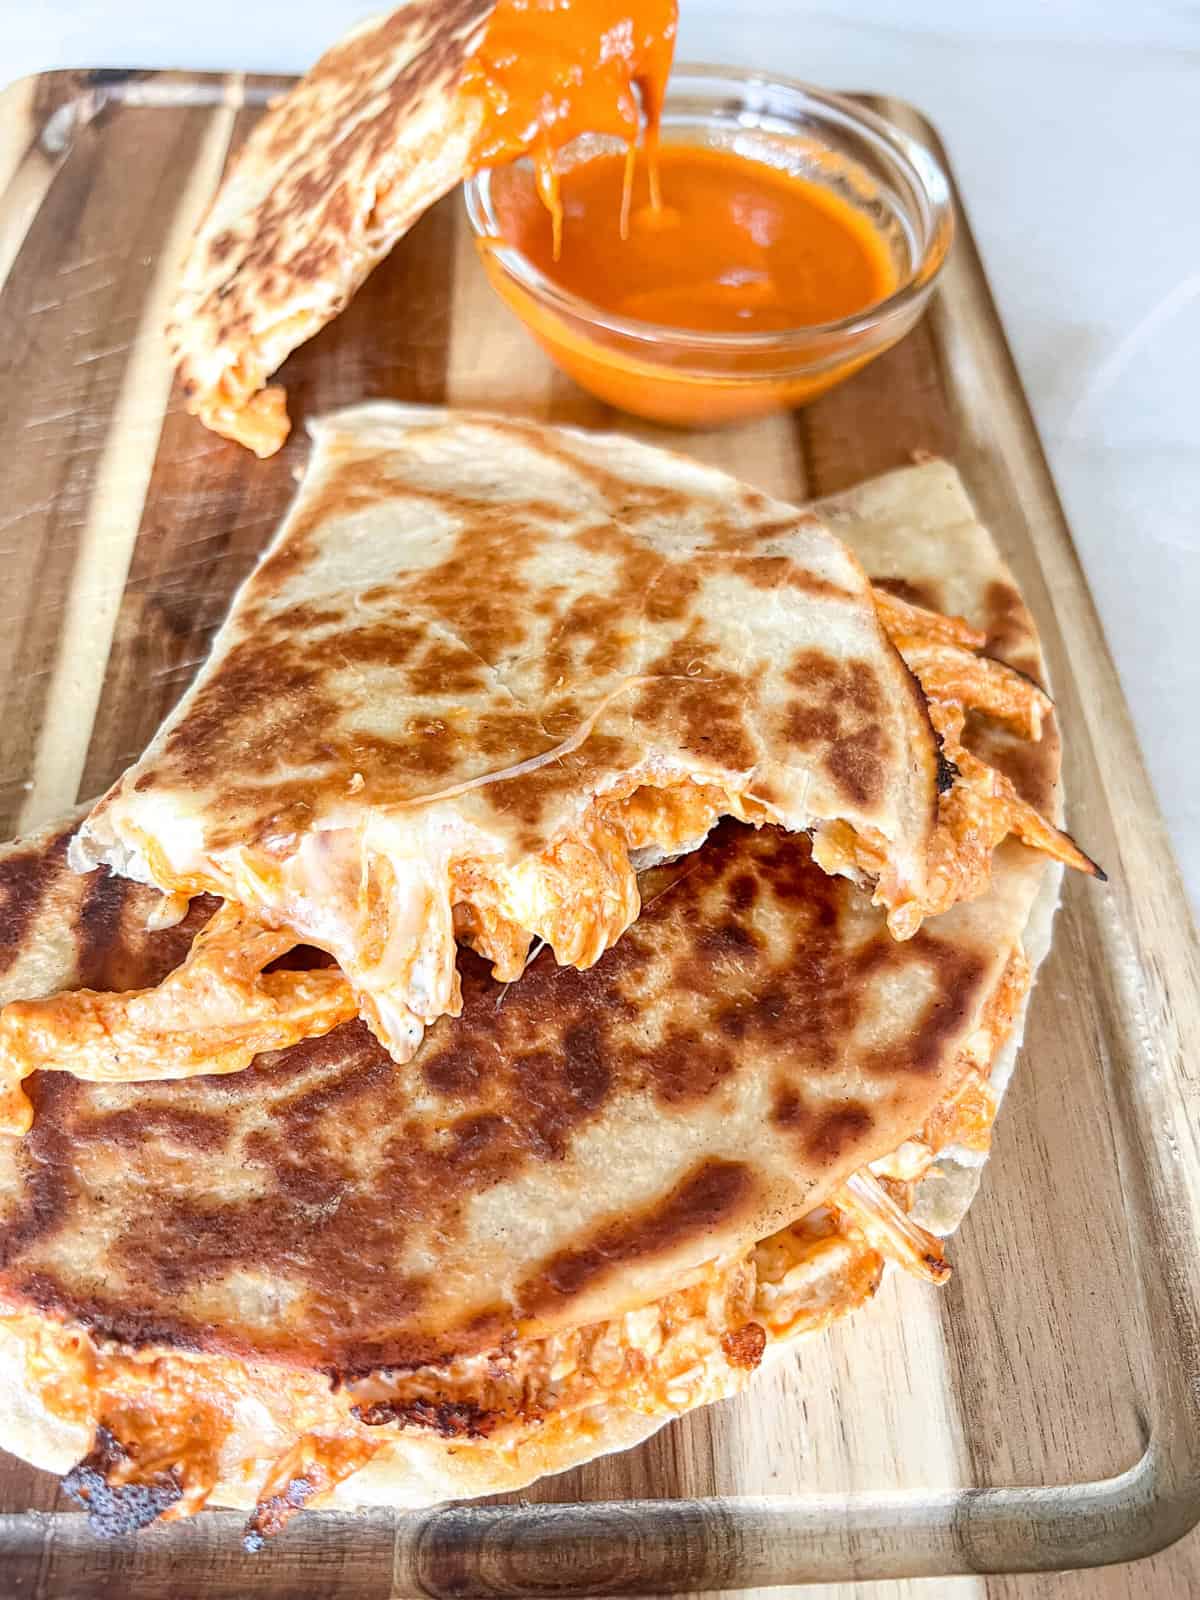 Platter of crispy quesadillas with a quesadilla dipped in buffalo sauce in the background.